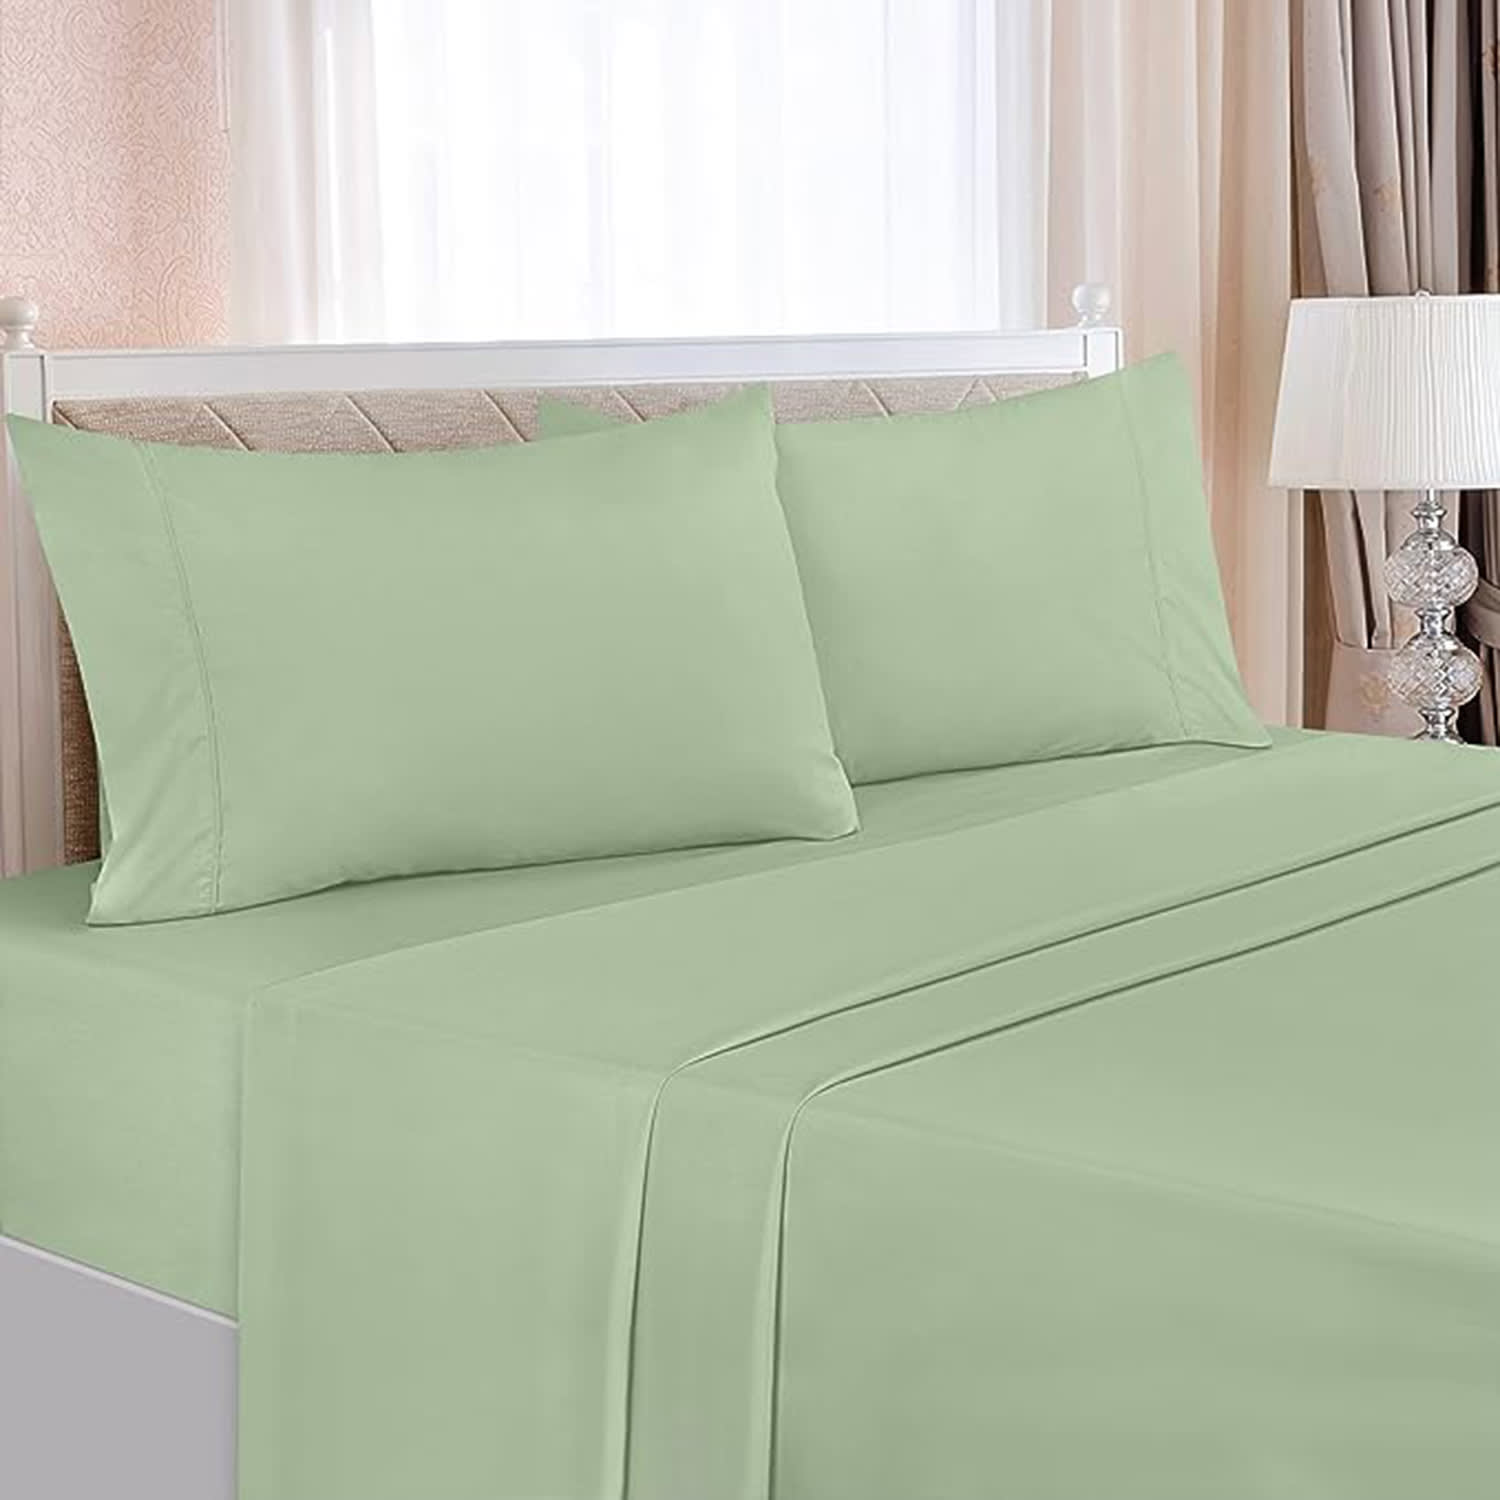 Lowest Price: Utopia Bedding Queen Bed Sheets Set